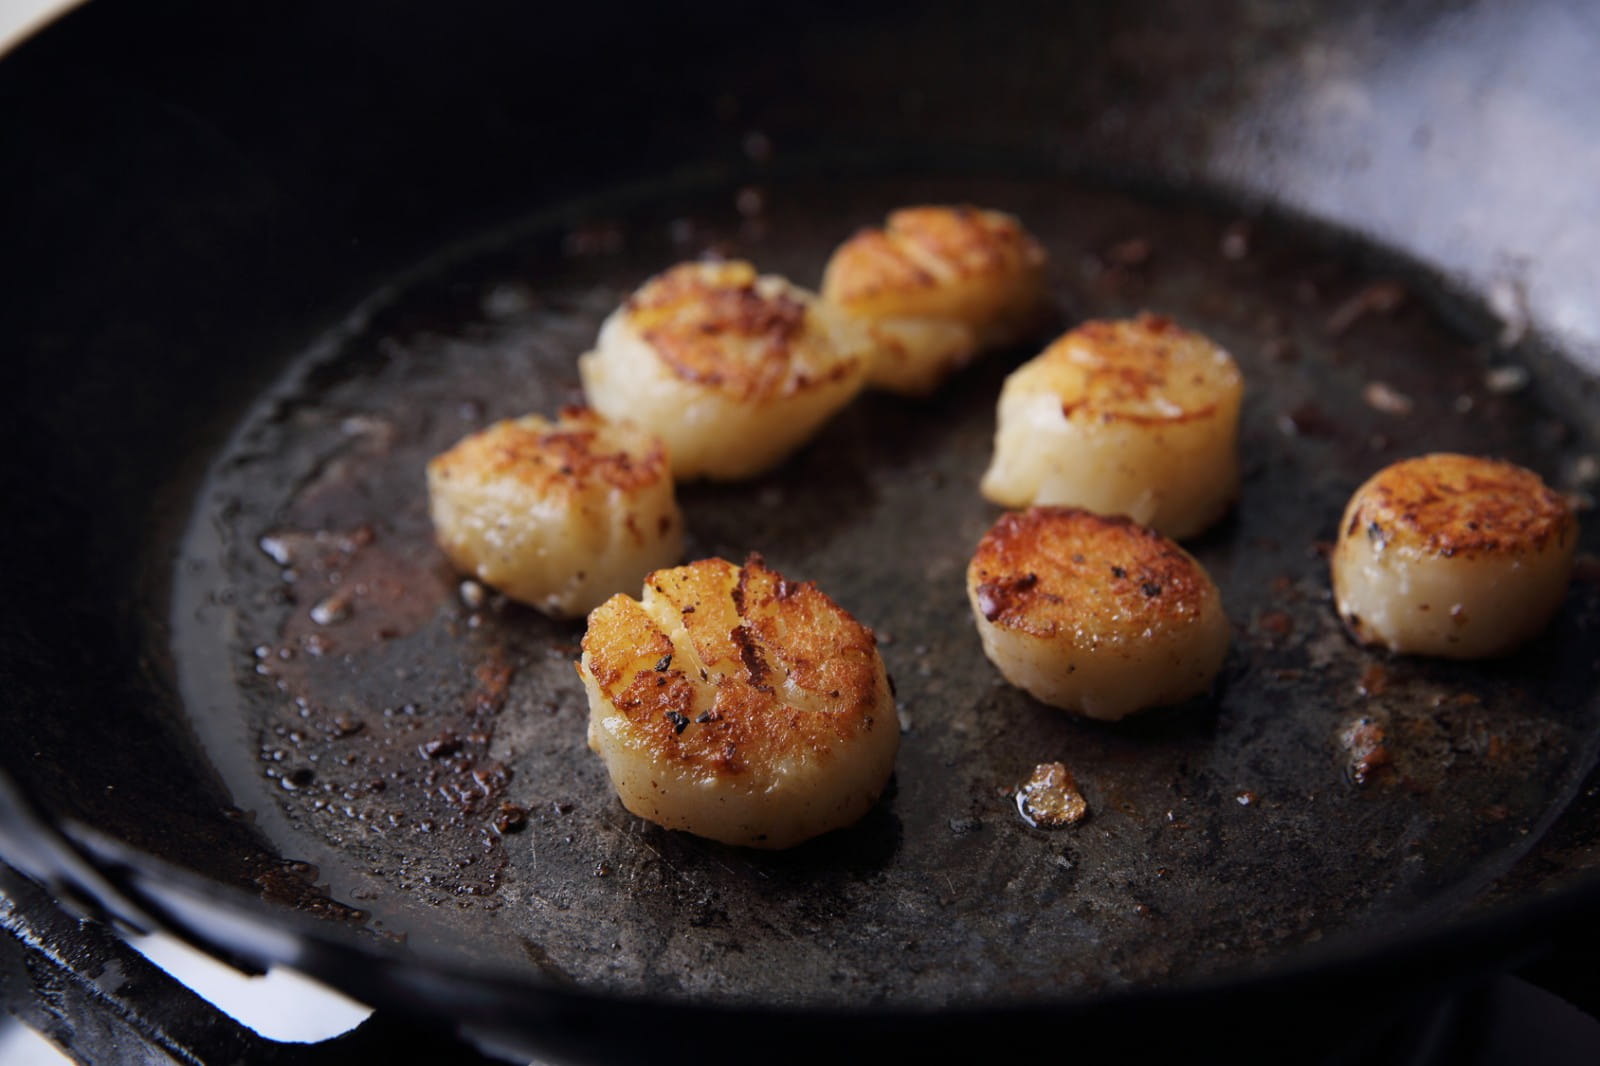 Top wine pairings with scallops